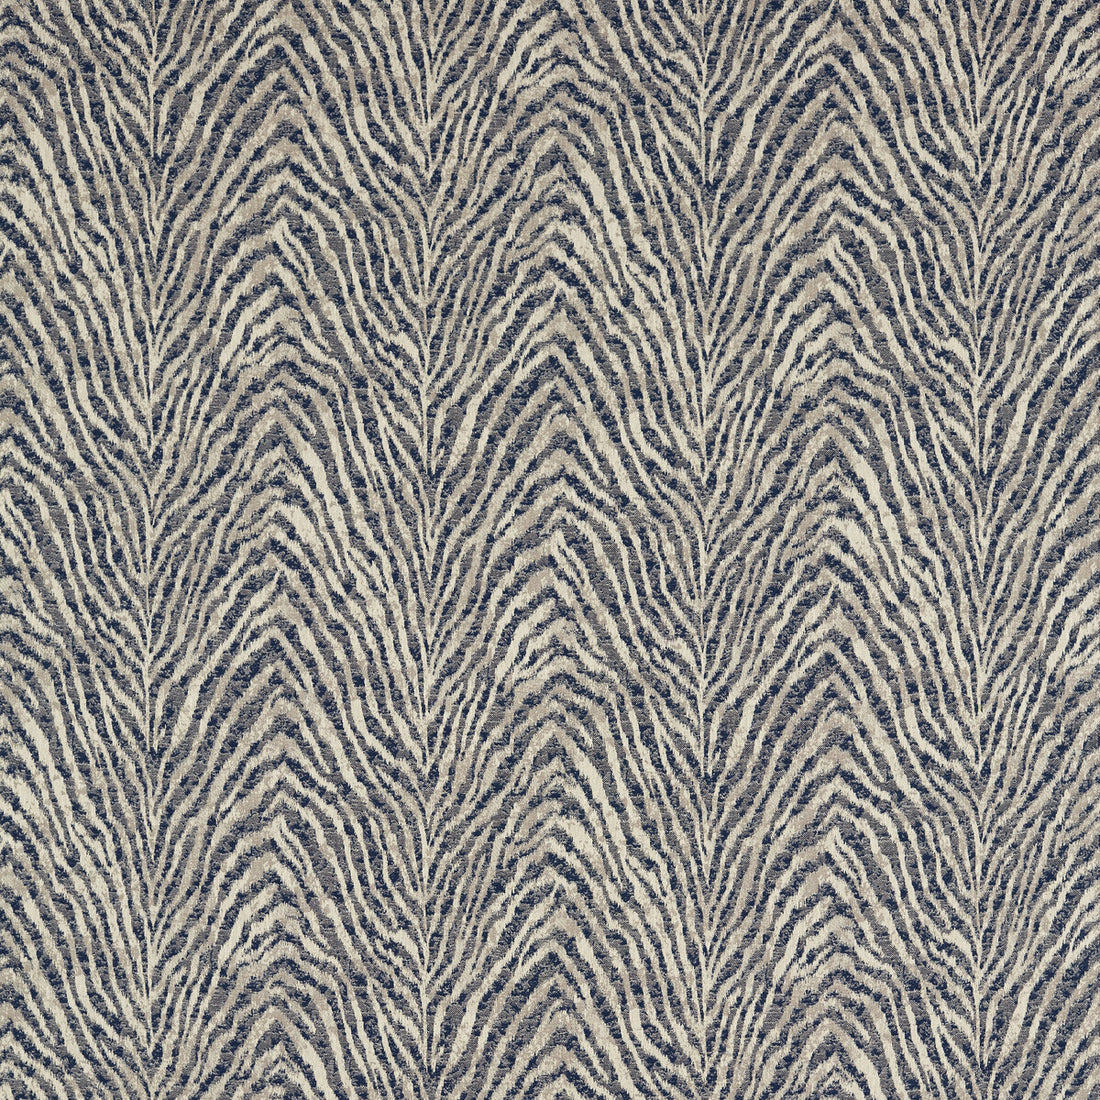 Manda fabric in midnight/linen color - pattern F1712/02.CAC.0 - by Clarke And Clarke in the Breegan Jane Fabrics collection